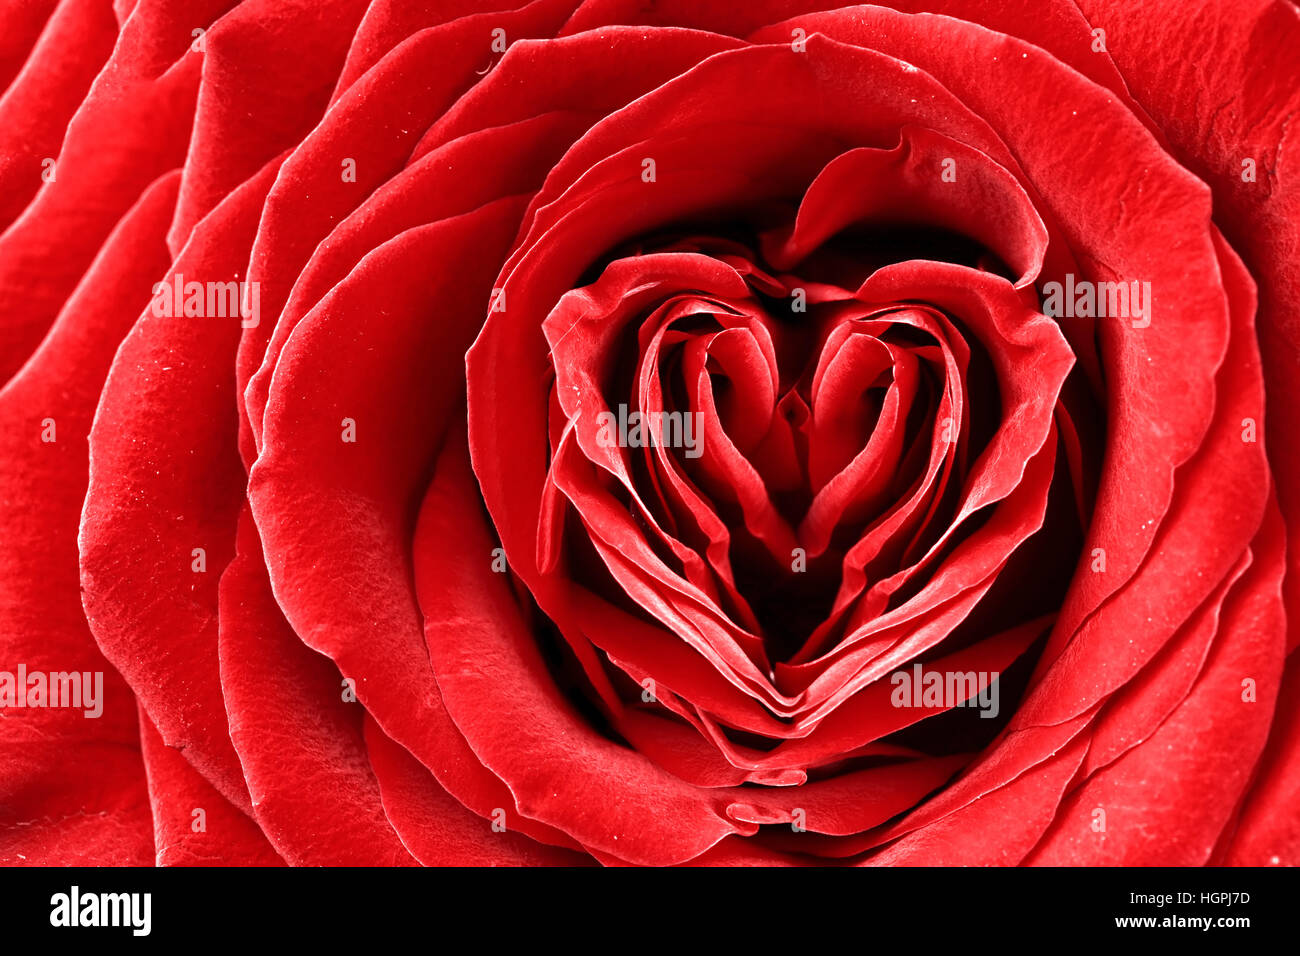 Heart shape in red rose Stock Photo